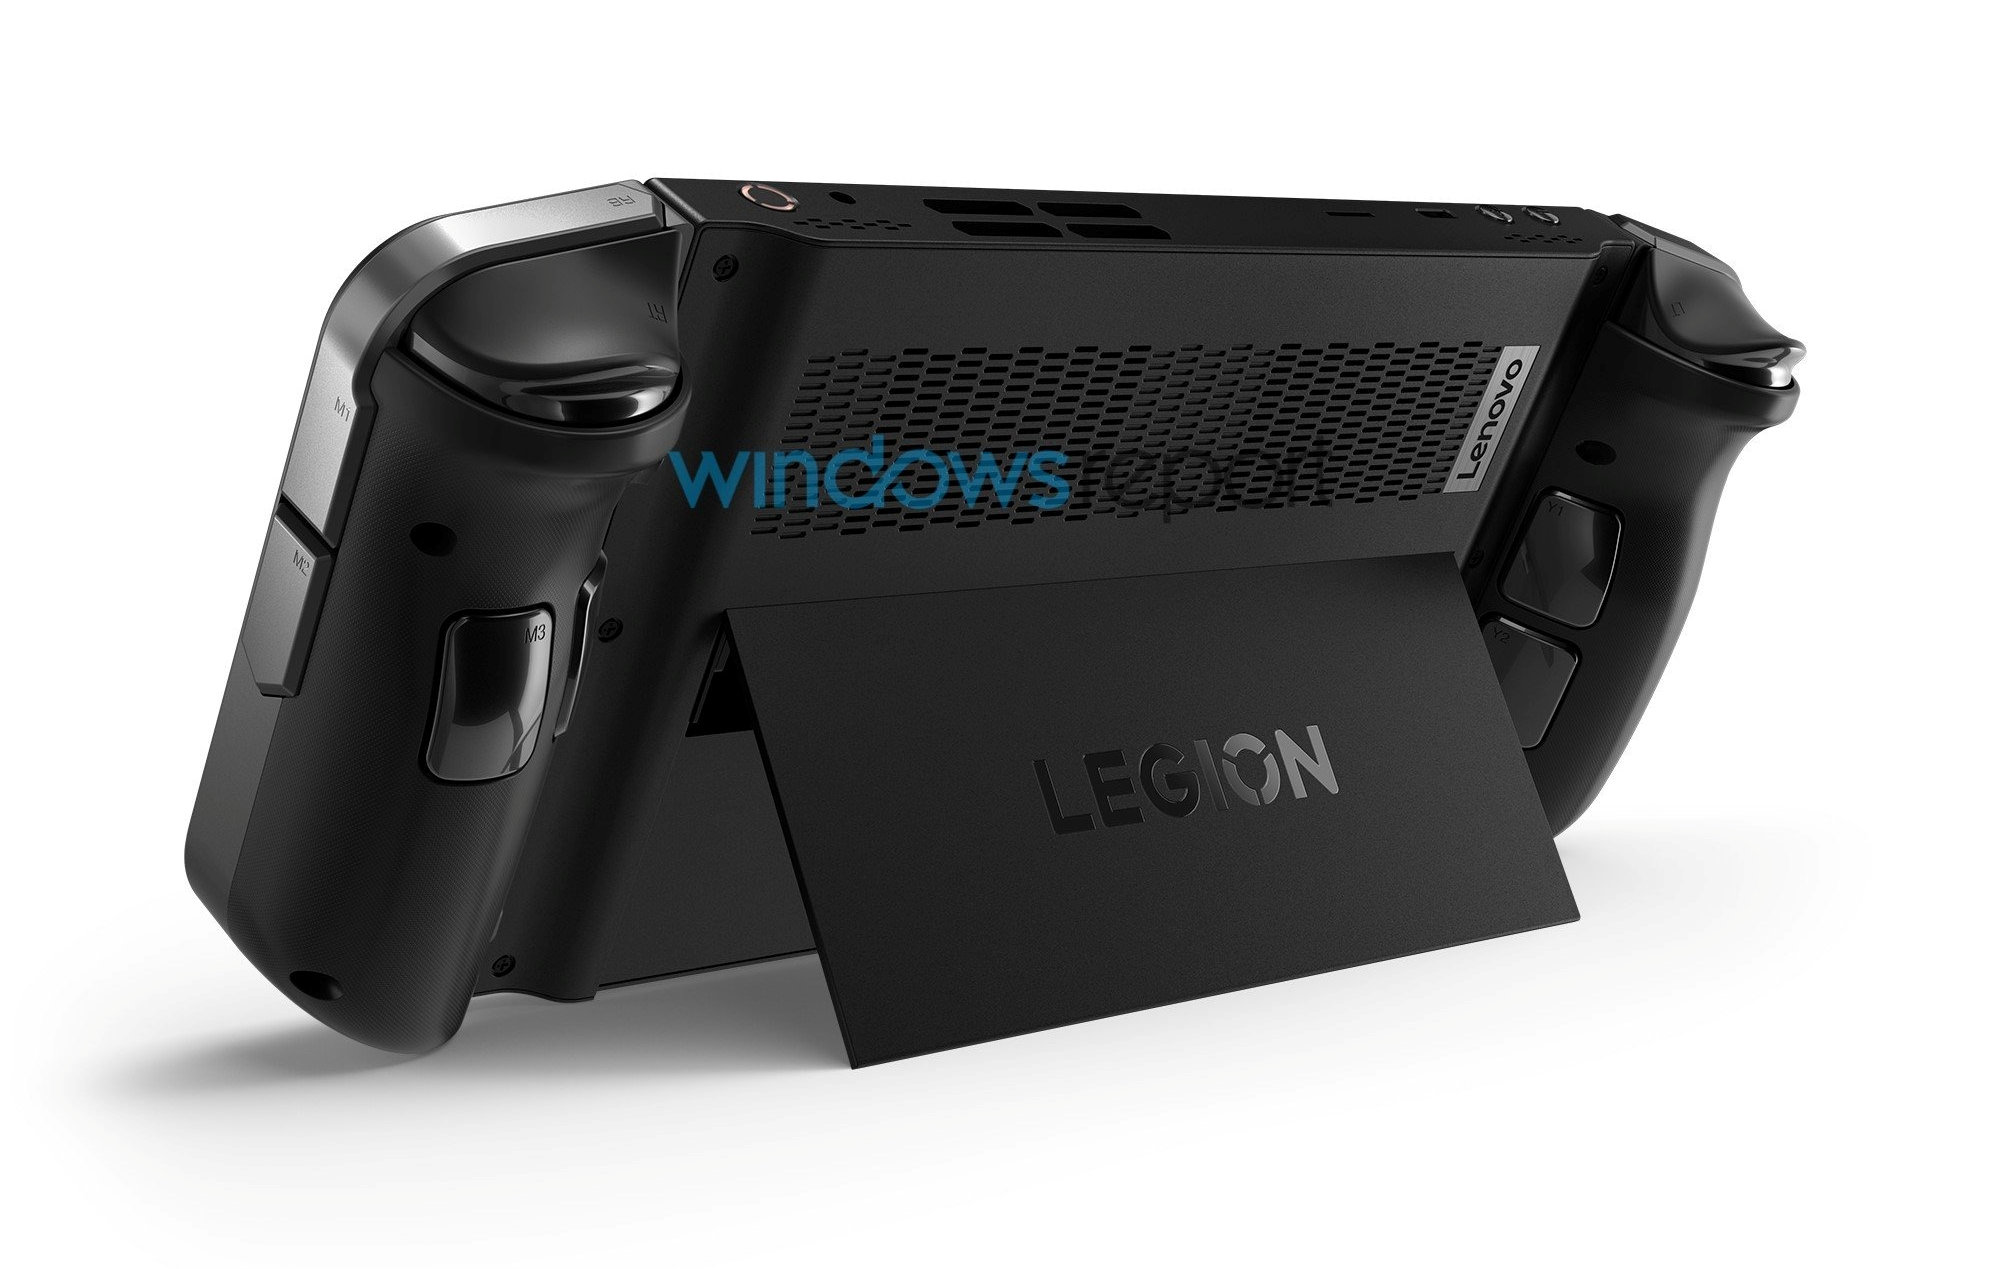 Lenovo Legion Go Price, Specs, and Launch Date Leaked - Insider Gaming